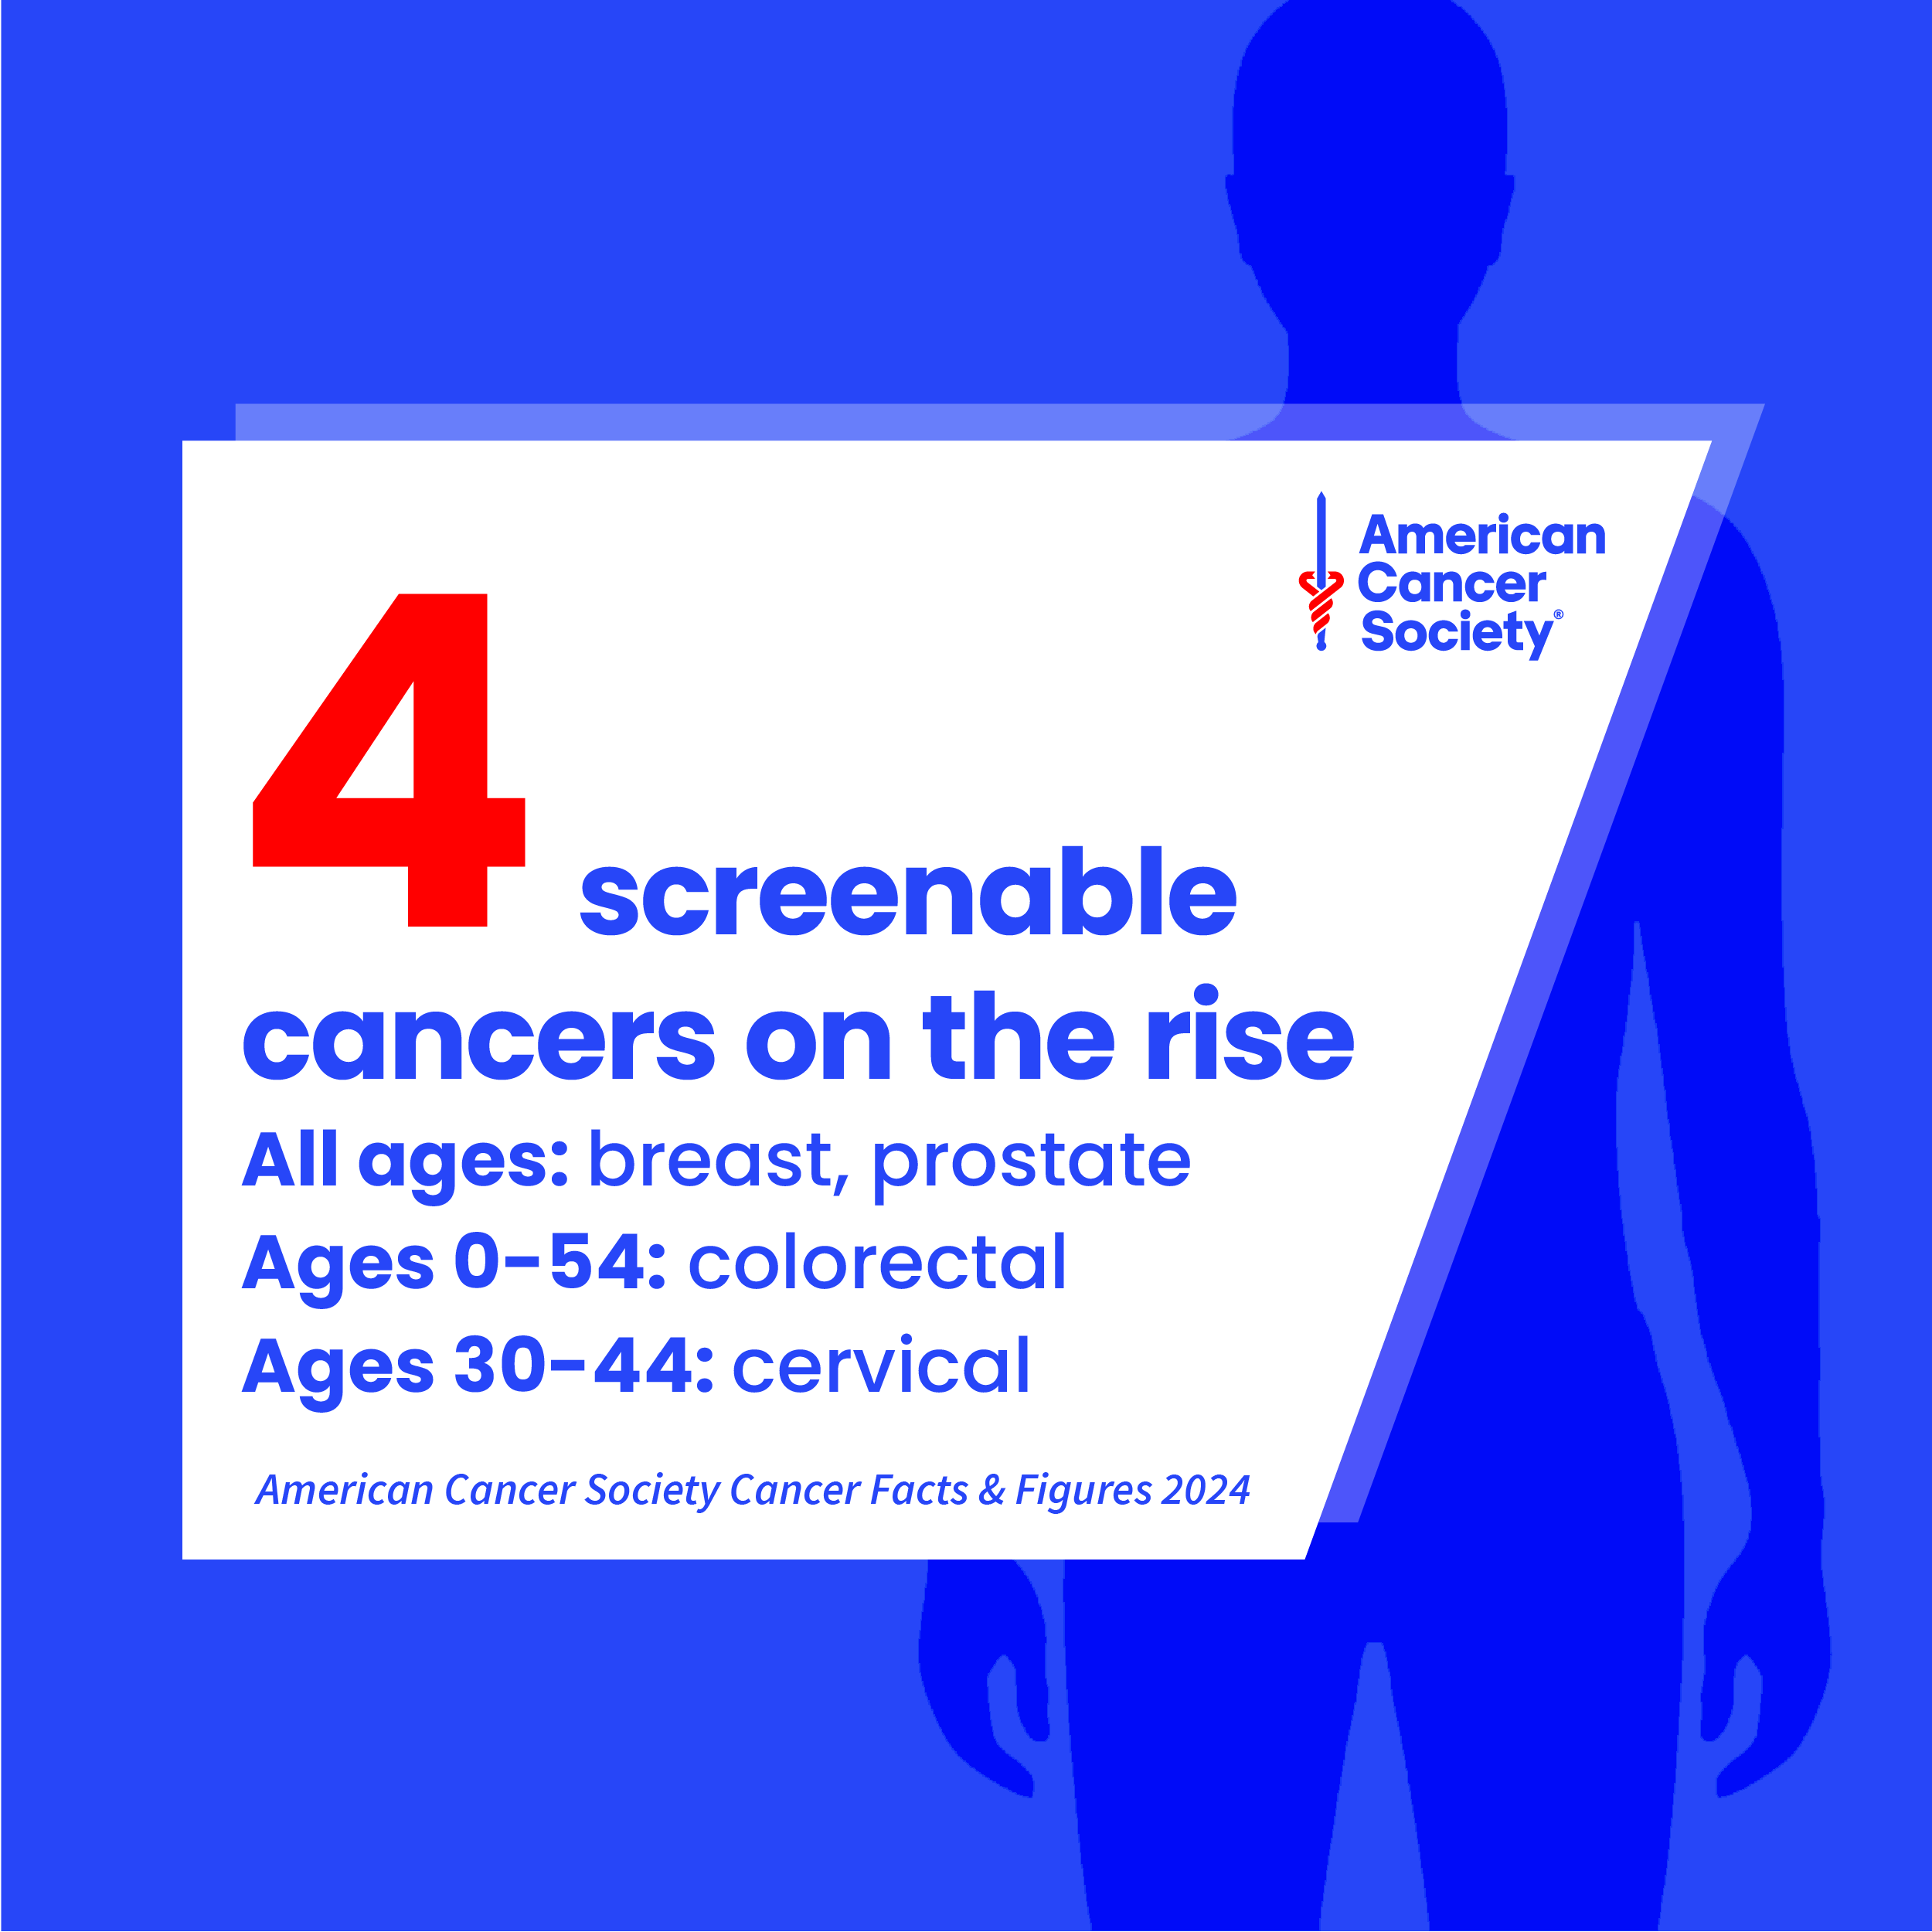 blue background, white trapezoid 4 screenable cancers on the rise All ages: breast, prostate; Ages 0-54: colorectal; ages 30-44 cervical